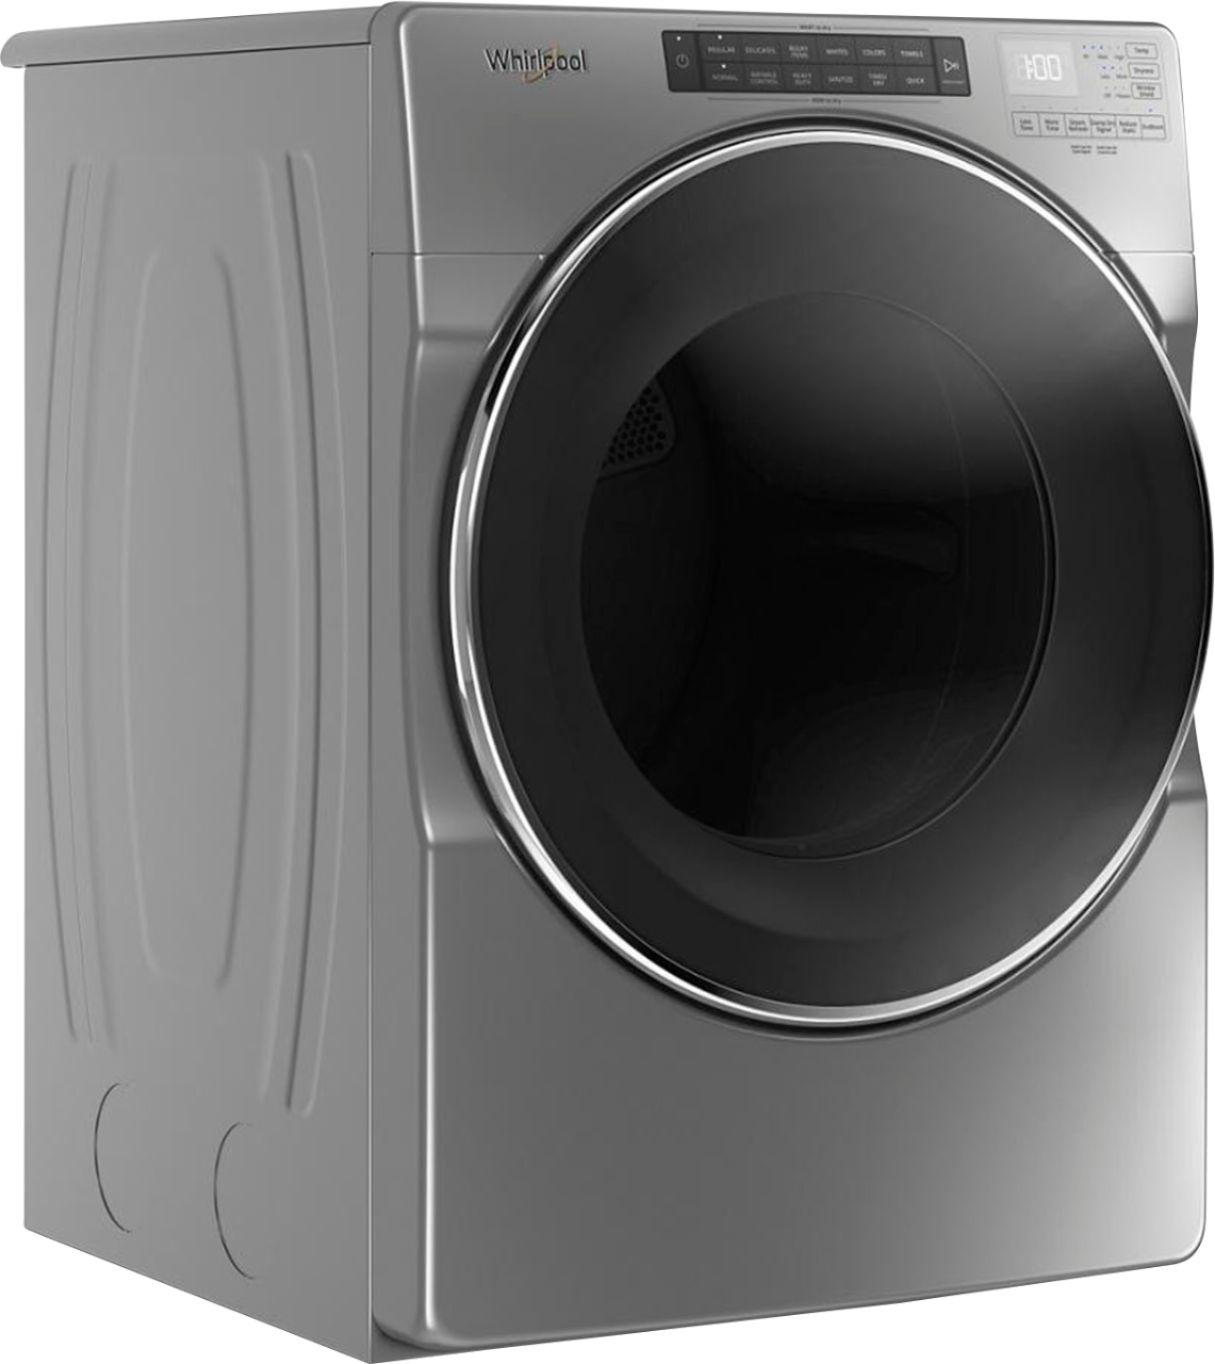 Angle View: Whirlpool - 7.4 Cu. Ft. Stackable Gas Dryer with Steam and Wrinkle Shield Plus Option - Chrome shadow